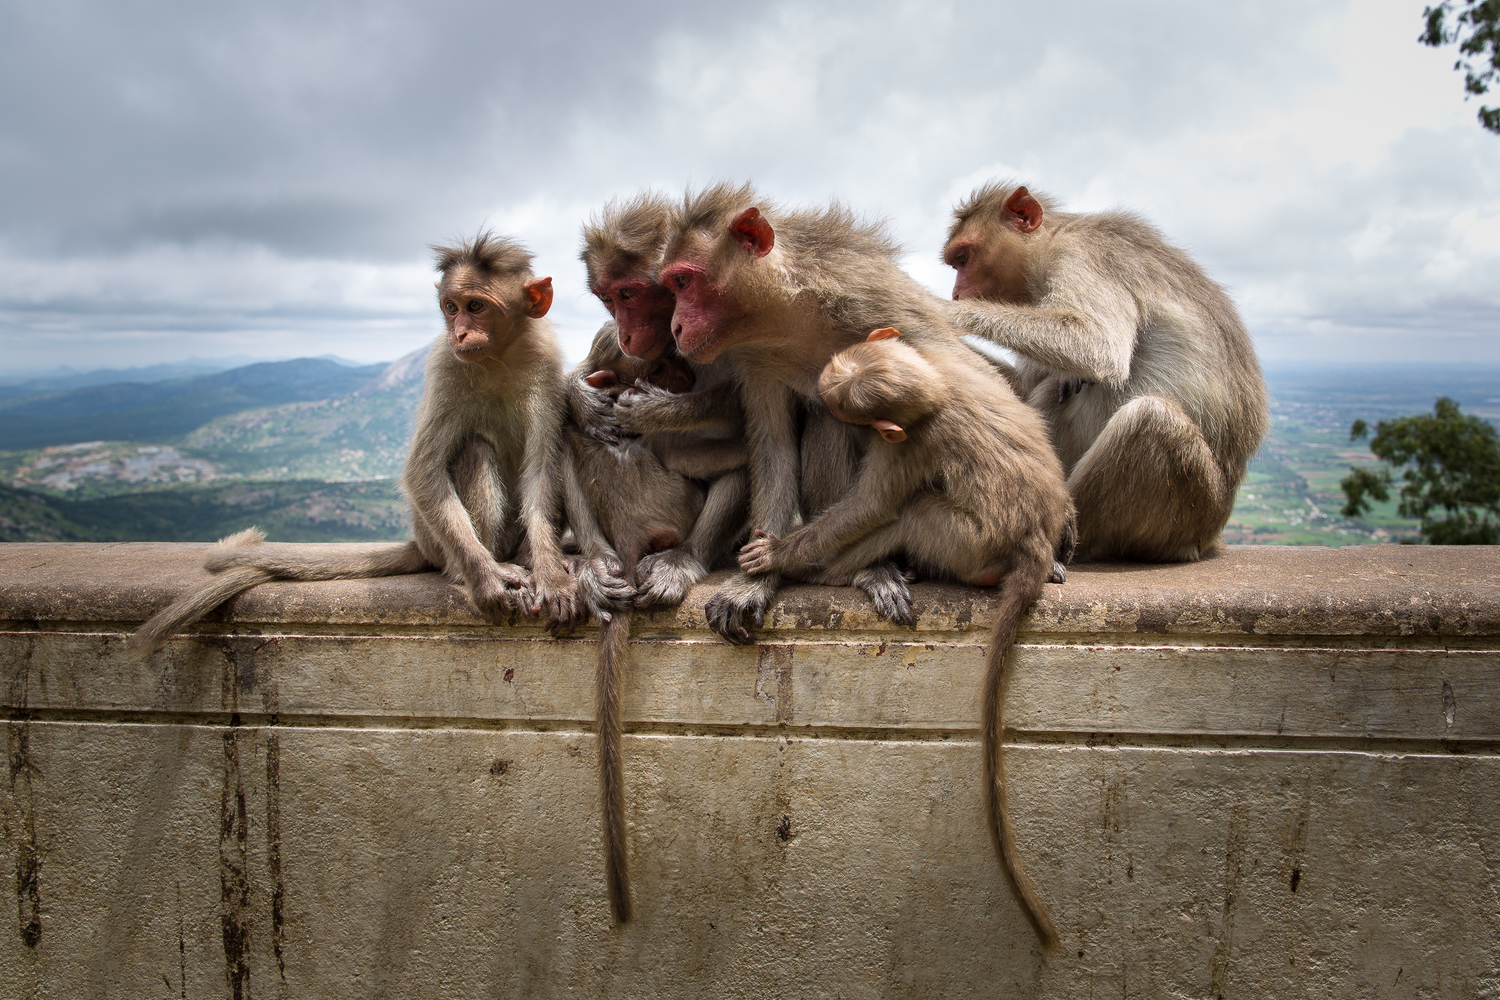 Wildlife Photography - Bonnet Macaques by John Rowell